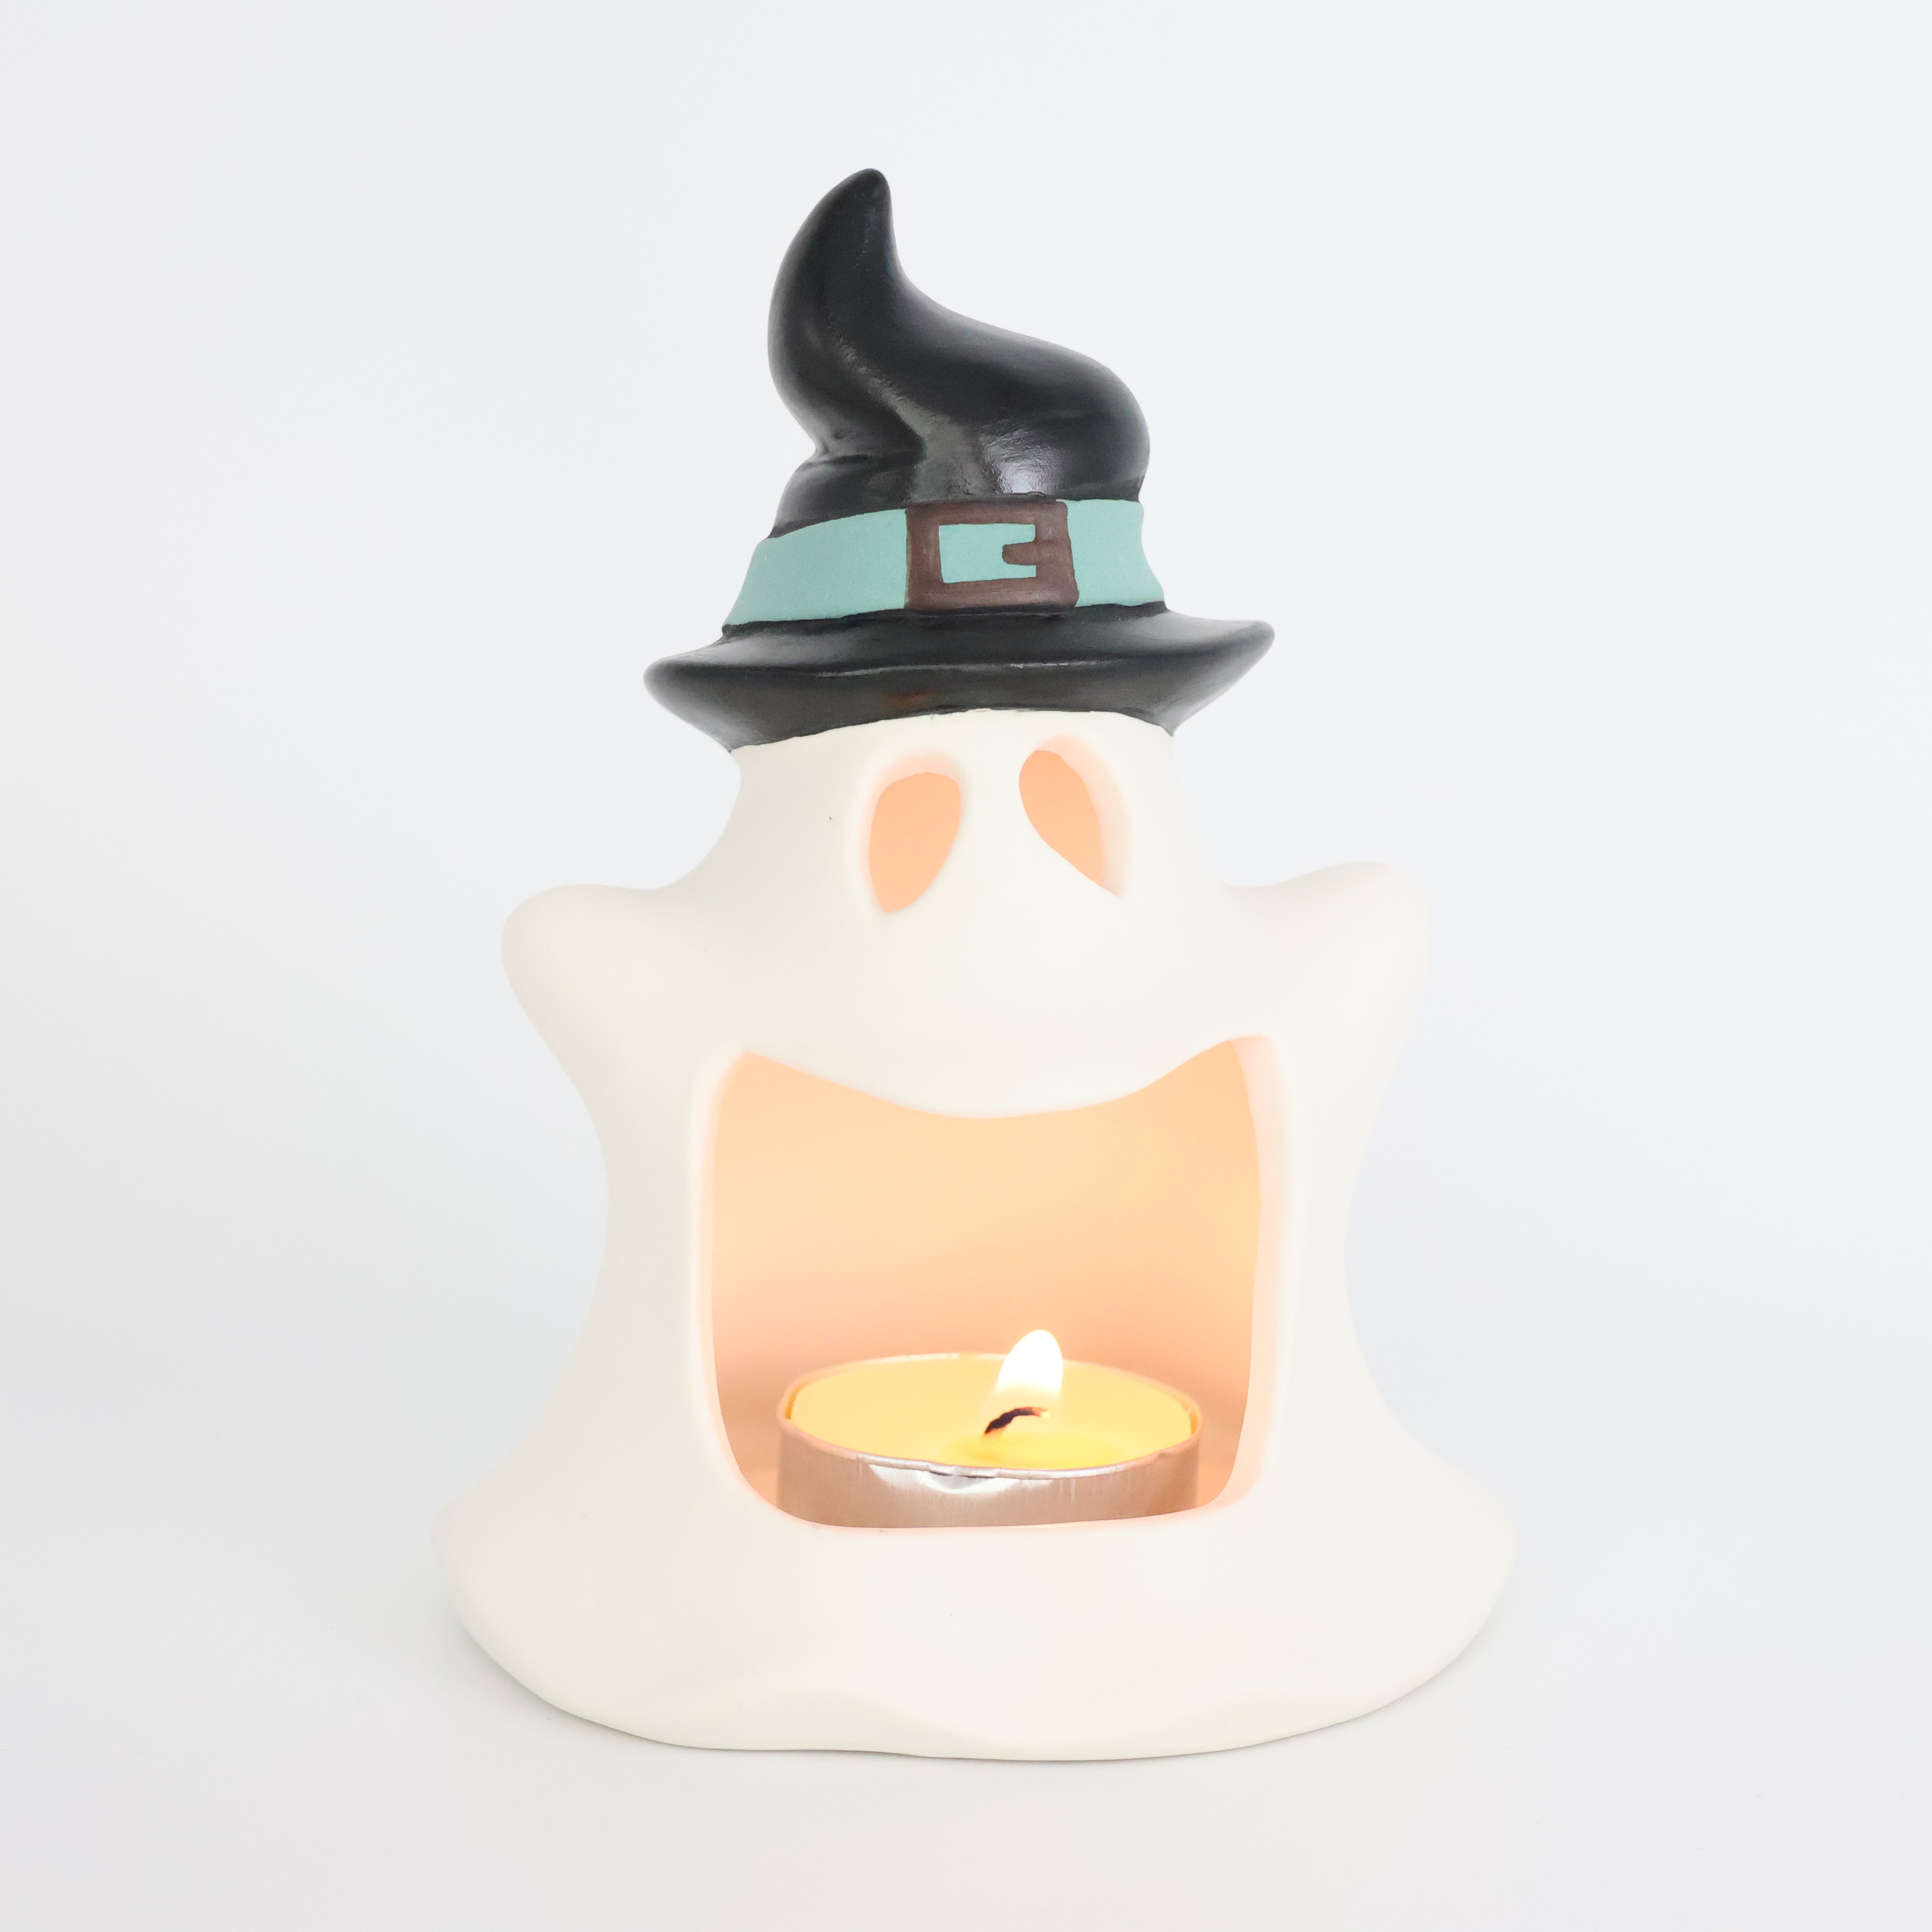 I-Ceramic Halloween Ghost Candle Holder